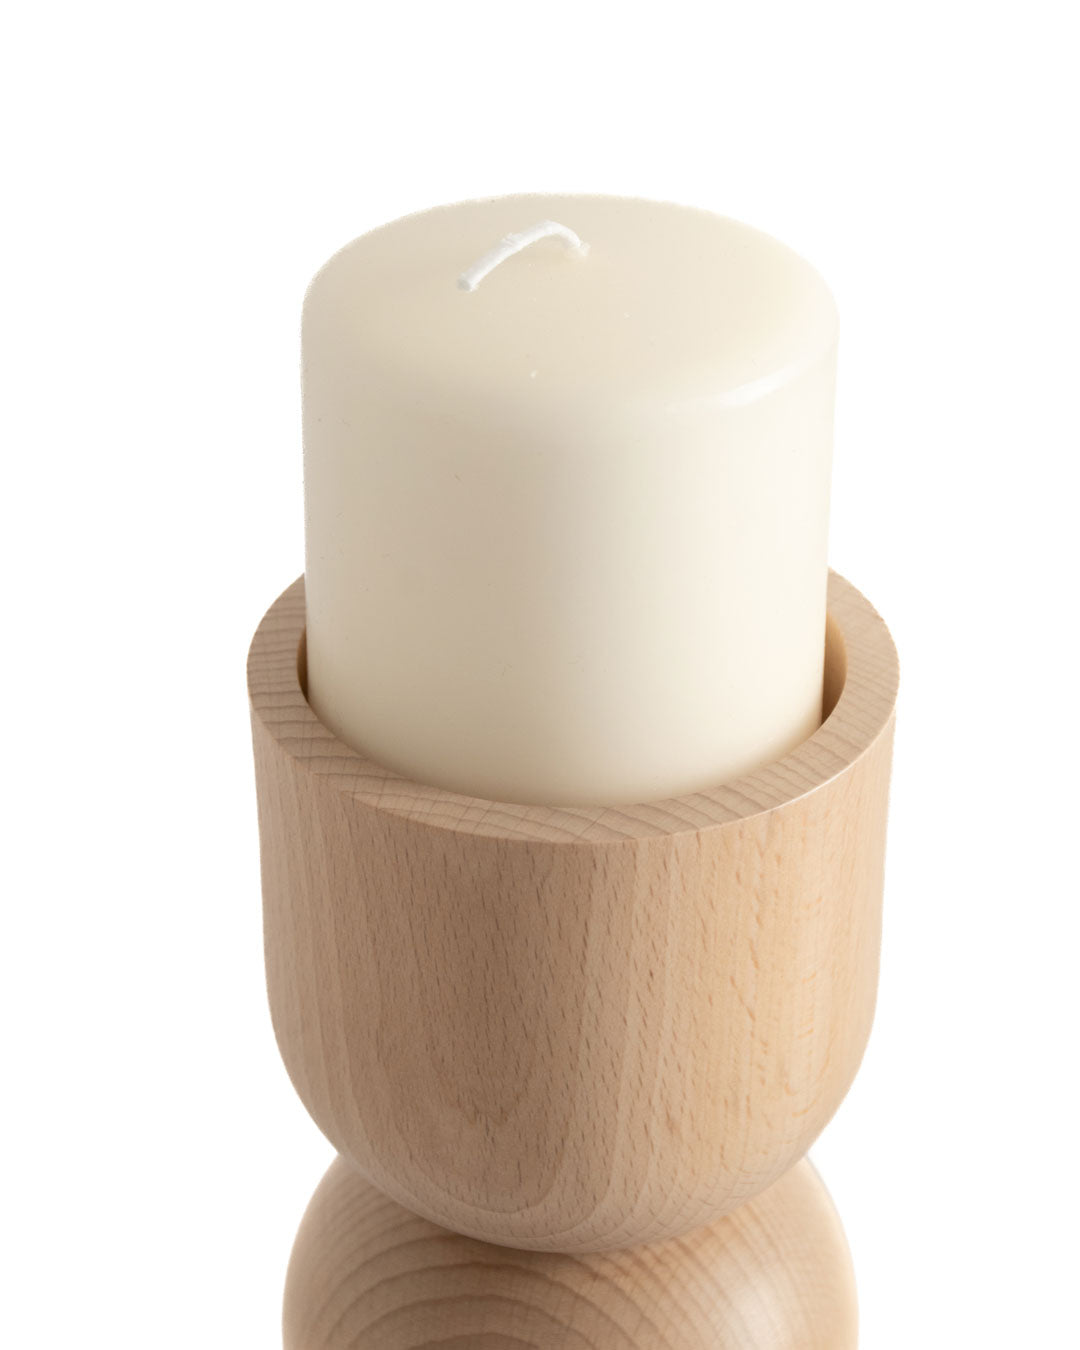 Candleholder-3-in-1-high candle support